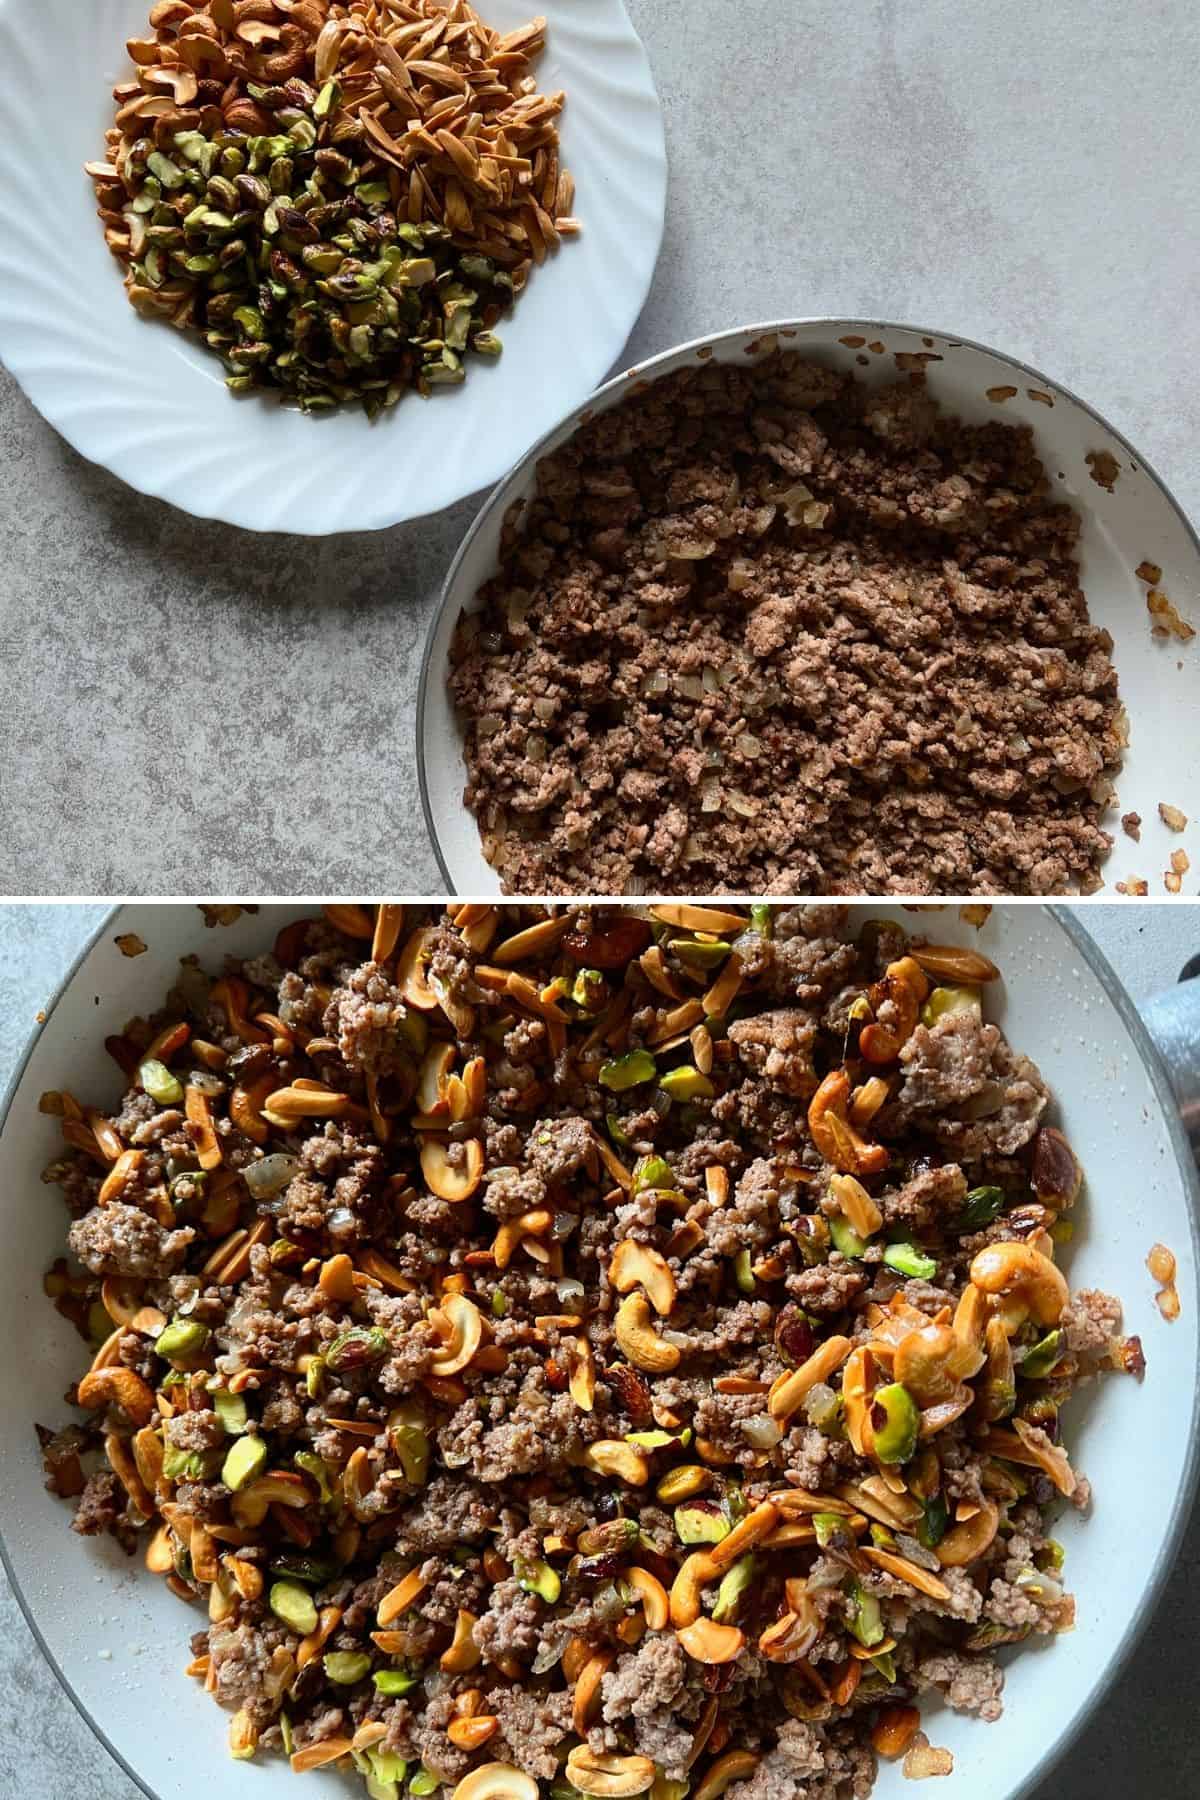 Steps for mixing fried nuts with cooked beef